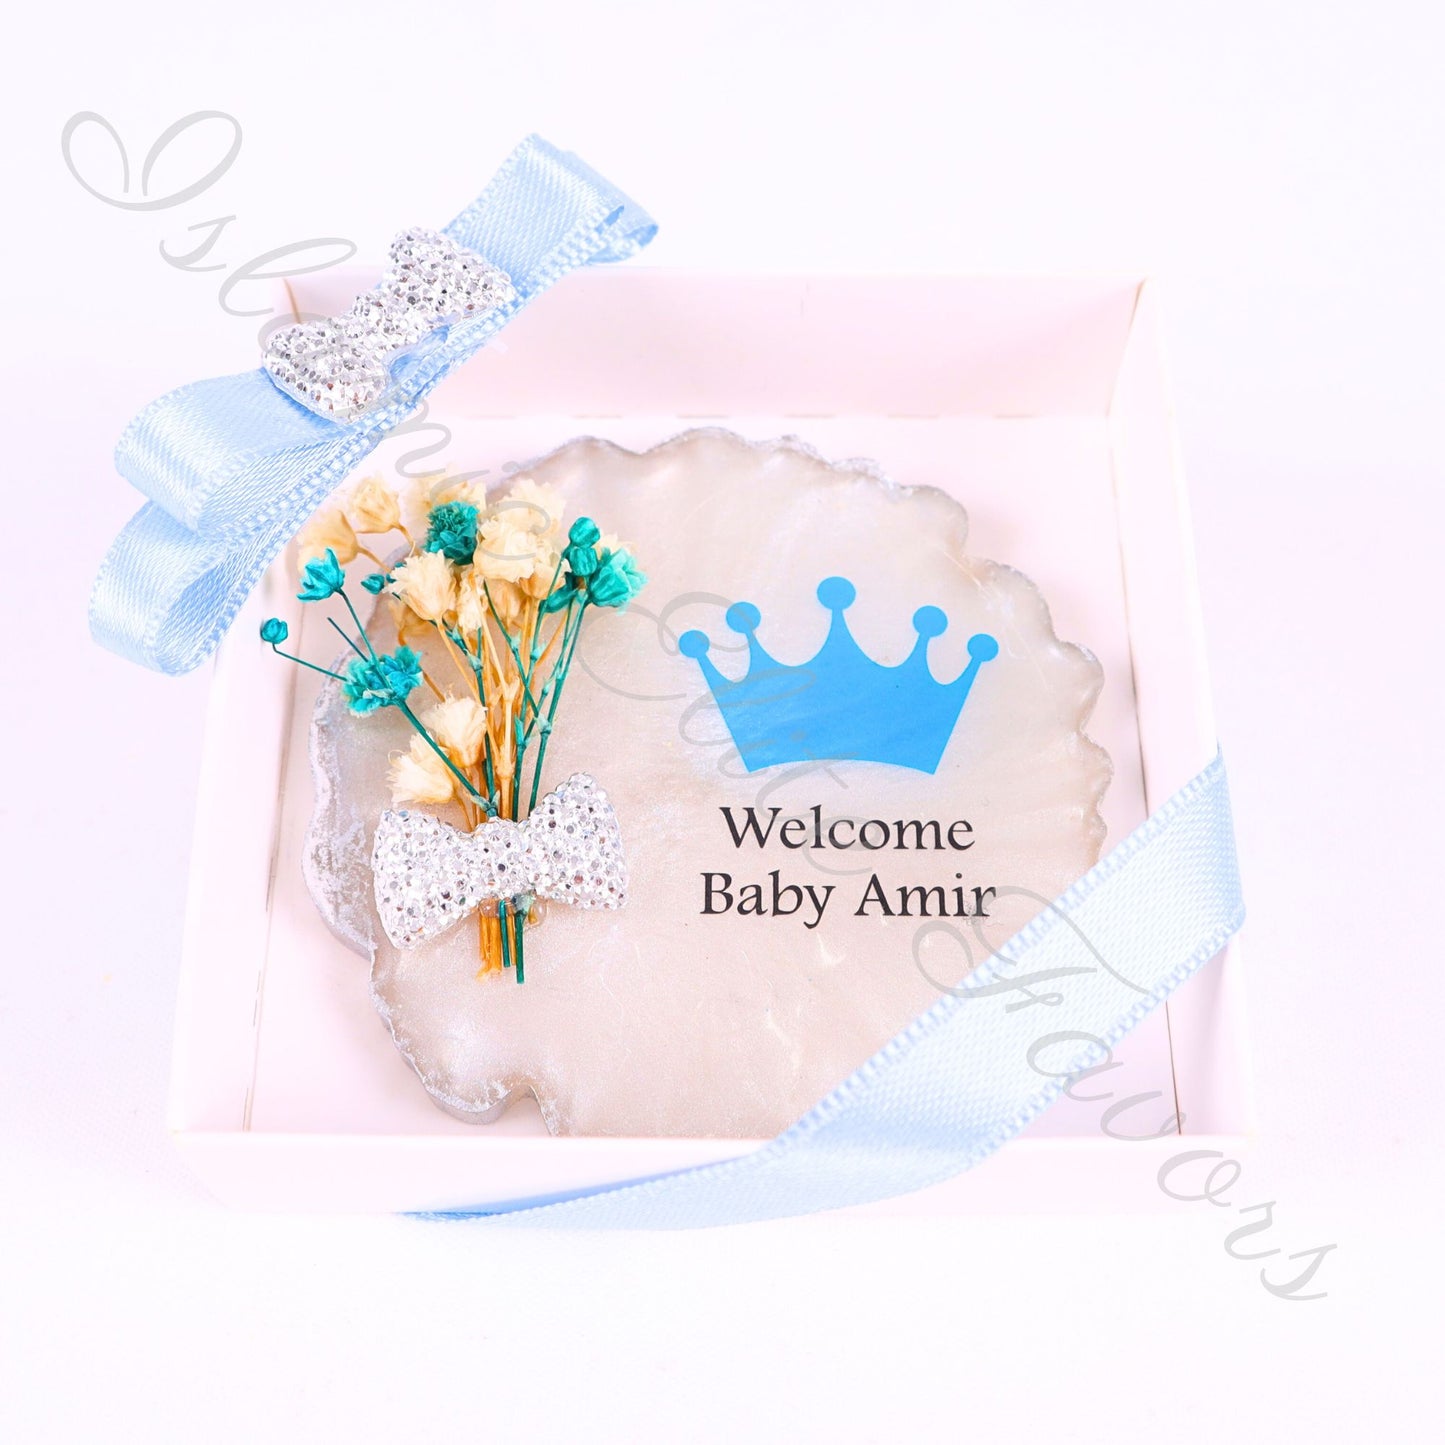 Personalized Baby Shower Favors Epoxy Magnet for Baby Boy White Theme - Islamic Elite Favors is a handmade gift shop offering a wide variety of unique and personalized gifts for all occasions. Whether you're looking for the perfect Ramadan, Eid, Hajj, wedding gift or something special for a birthday, baby shower or anniversary, we have something for everyone. High quality, made with love.